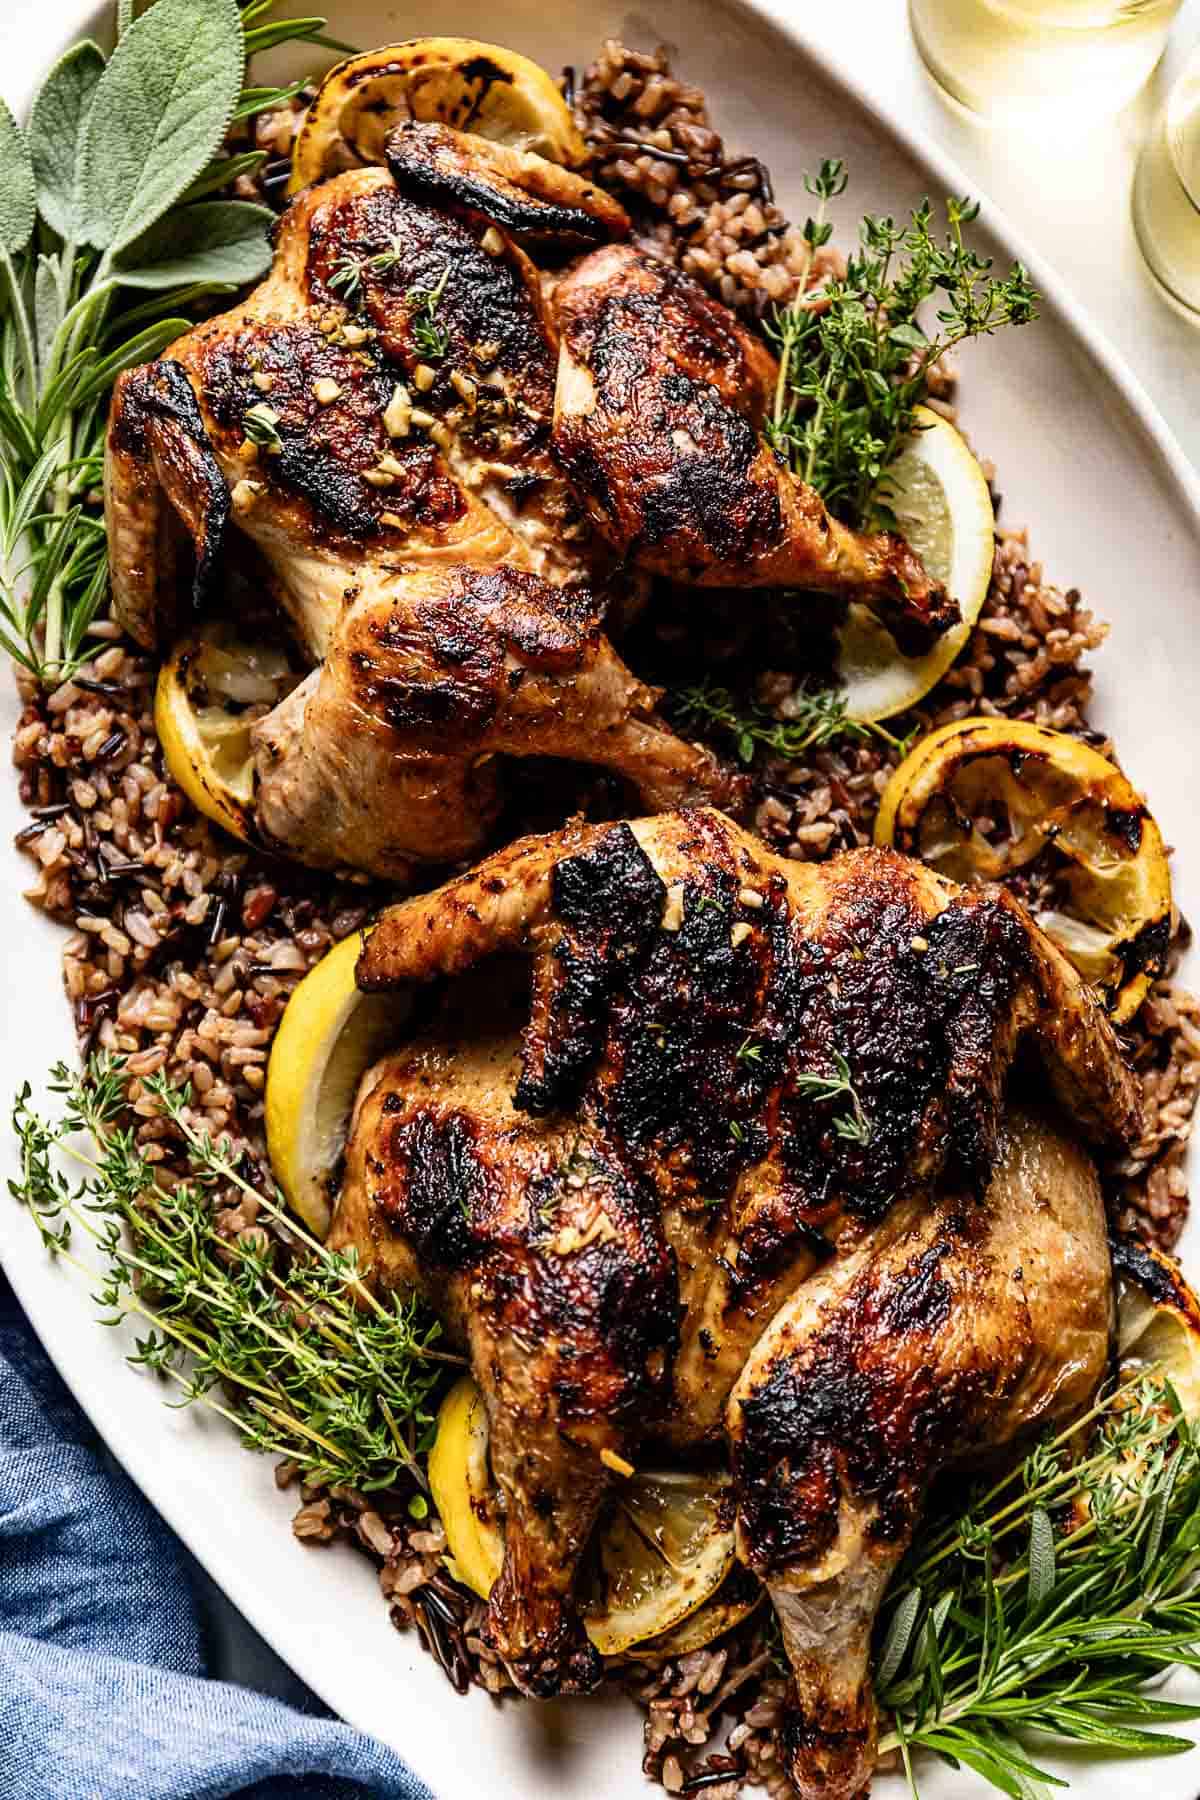 Grilled Cornish hens garnished with lemon and fresh herbs on a serving platter.